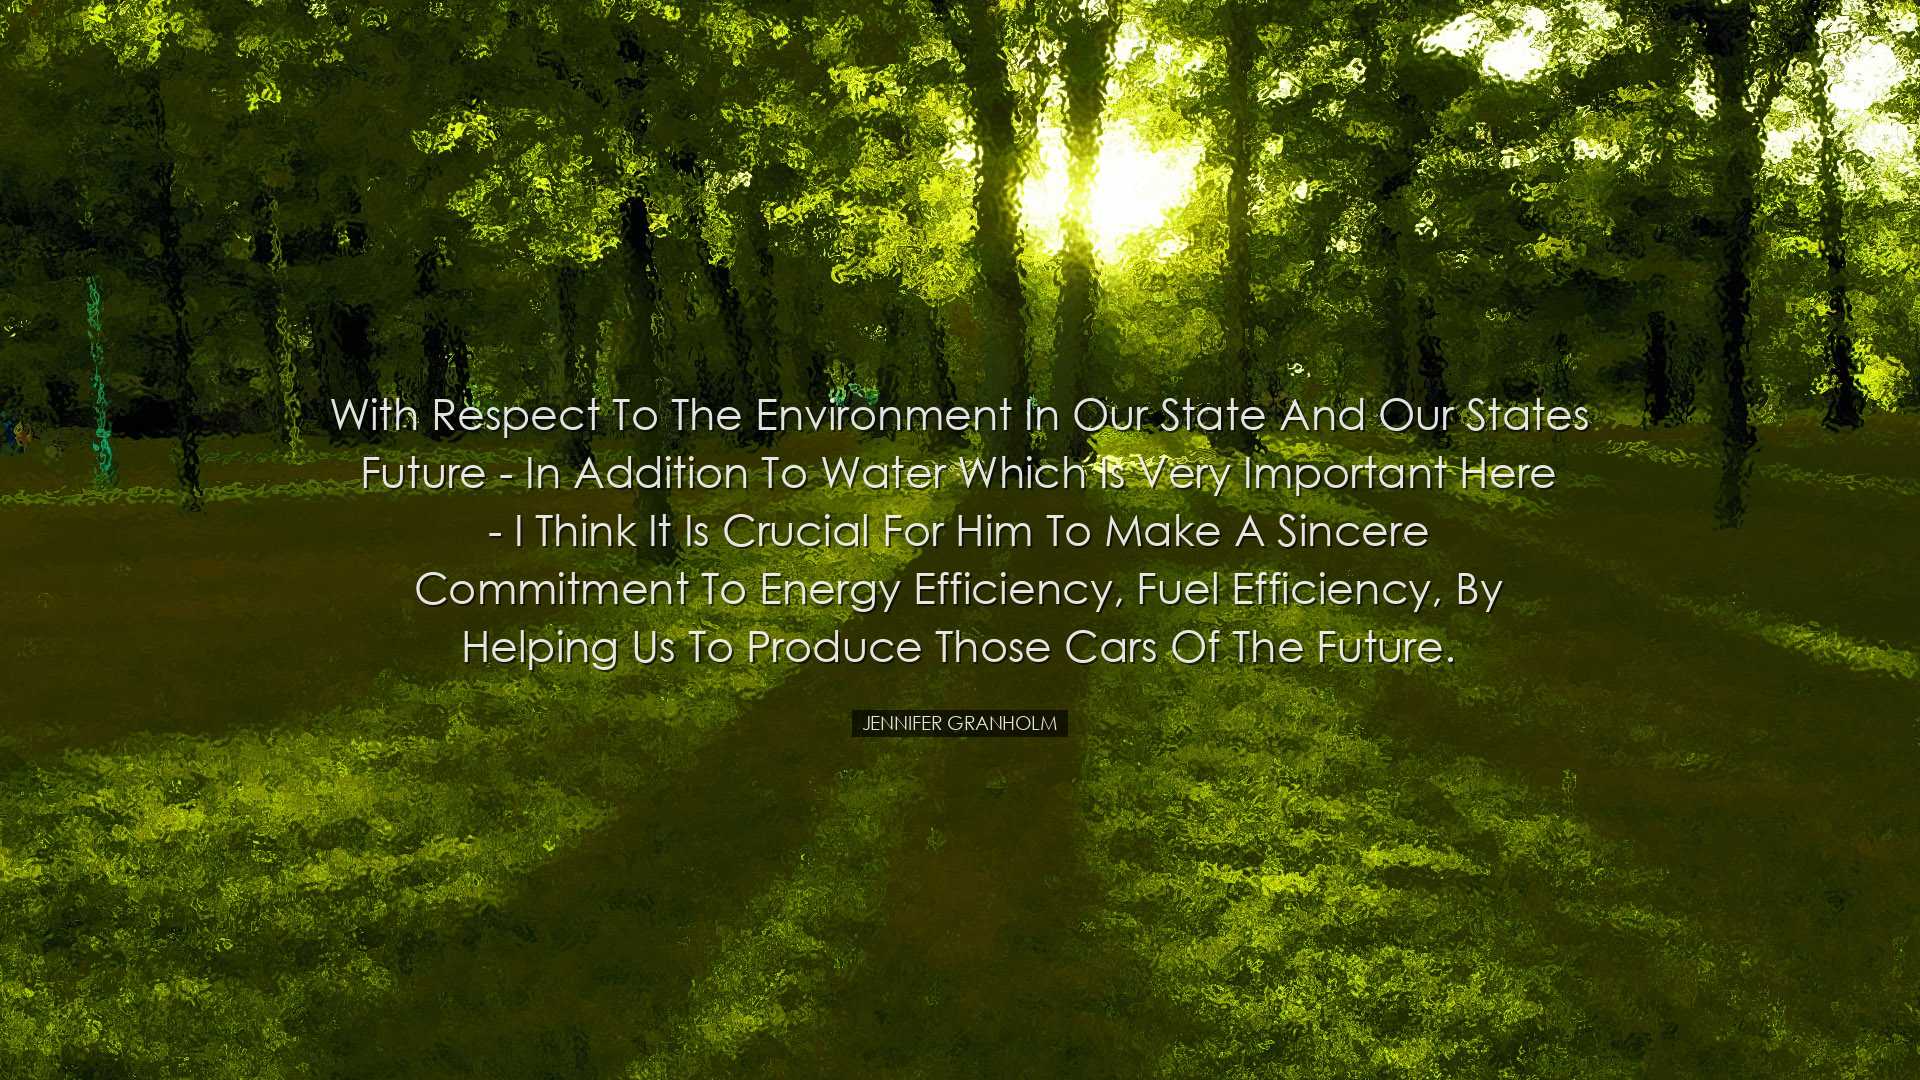 With respect to the environment in our state and our states future